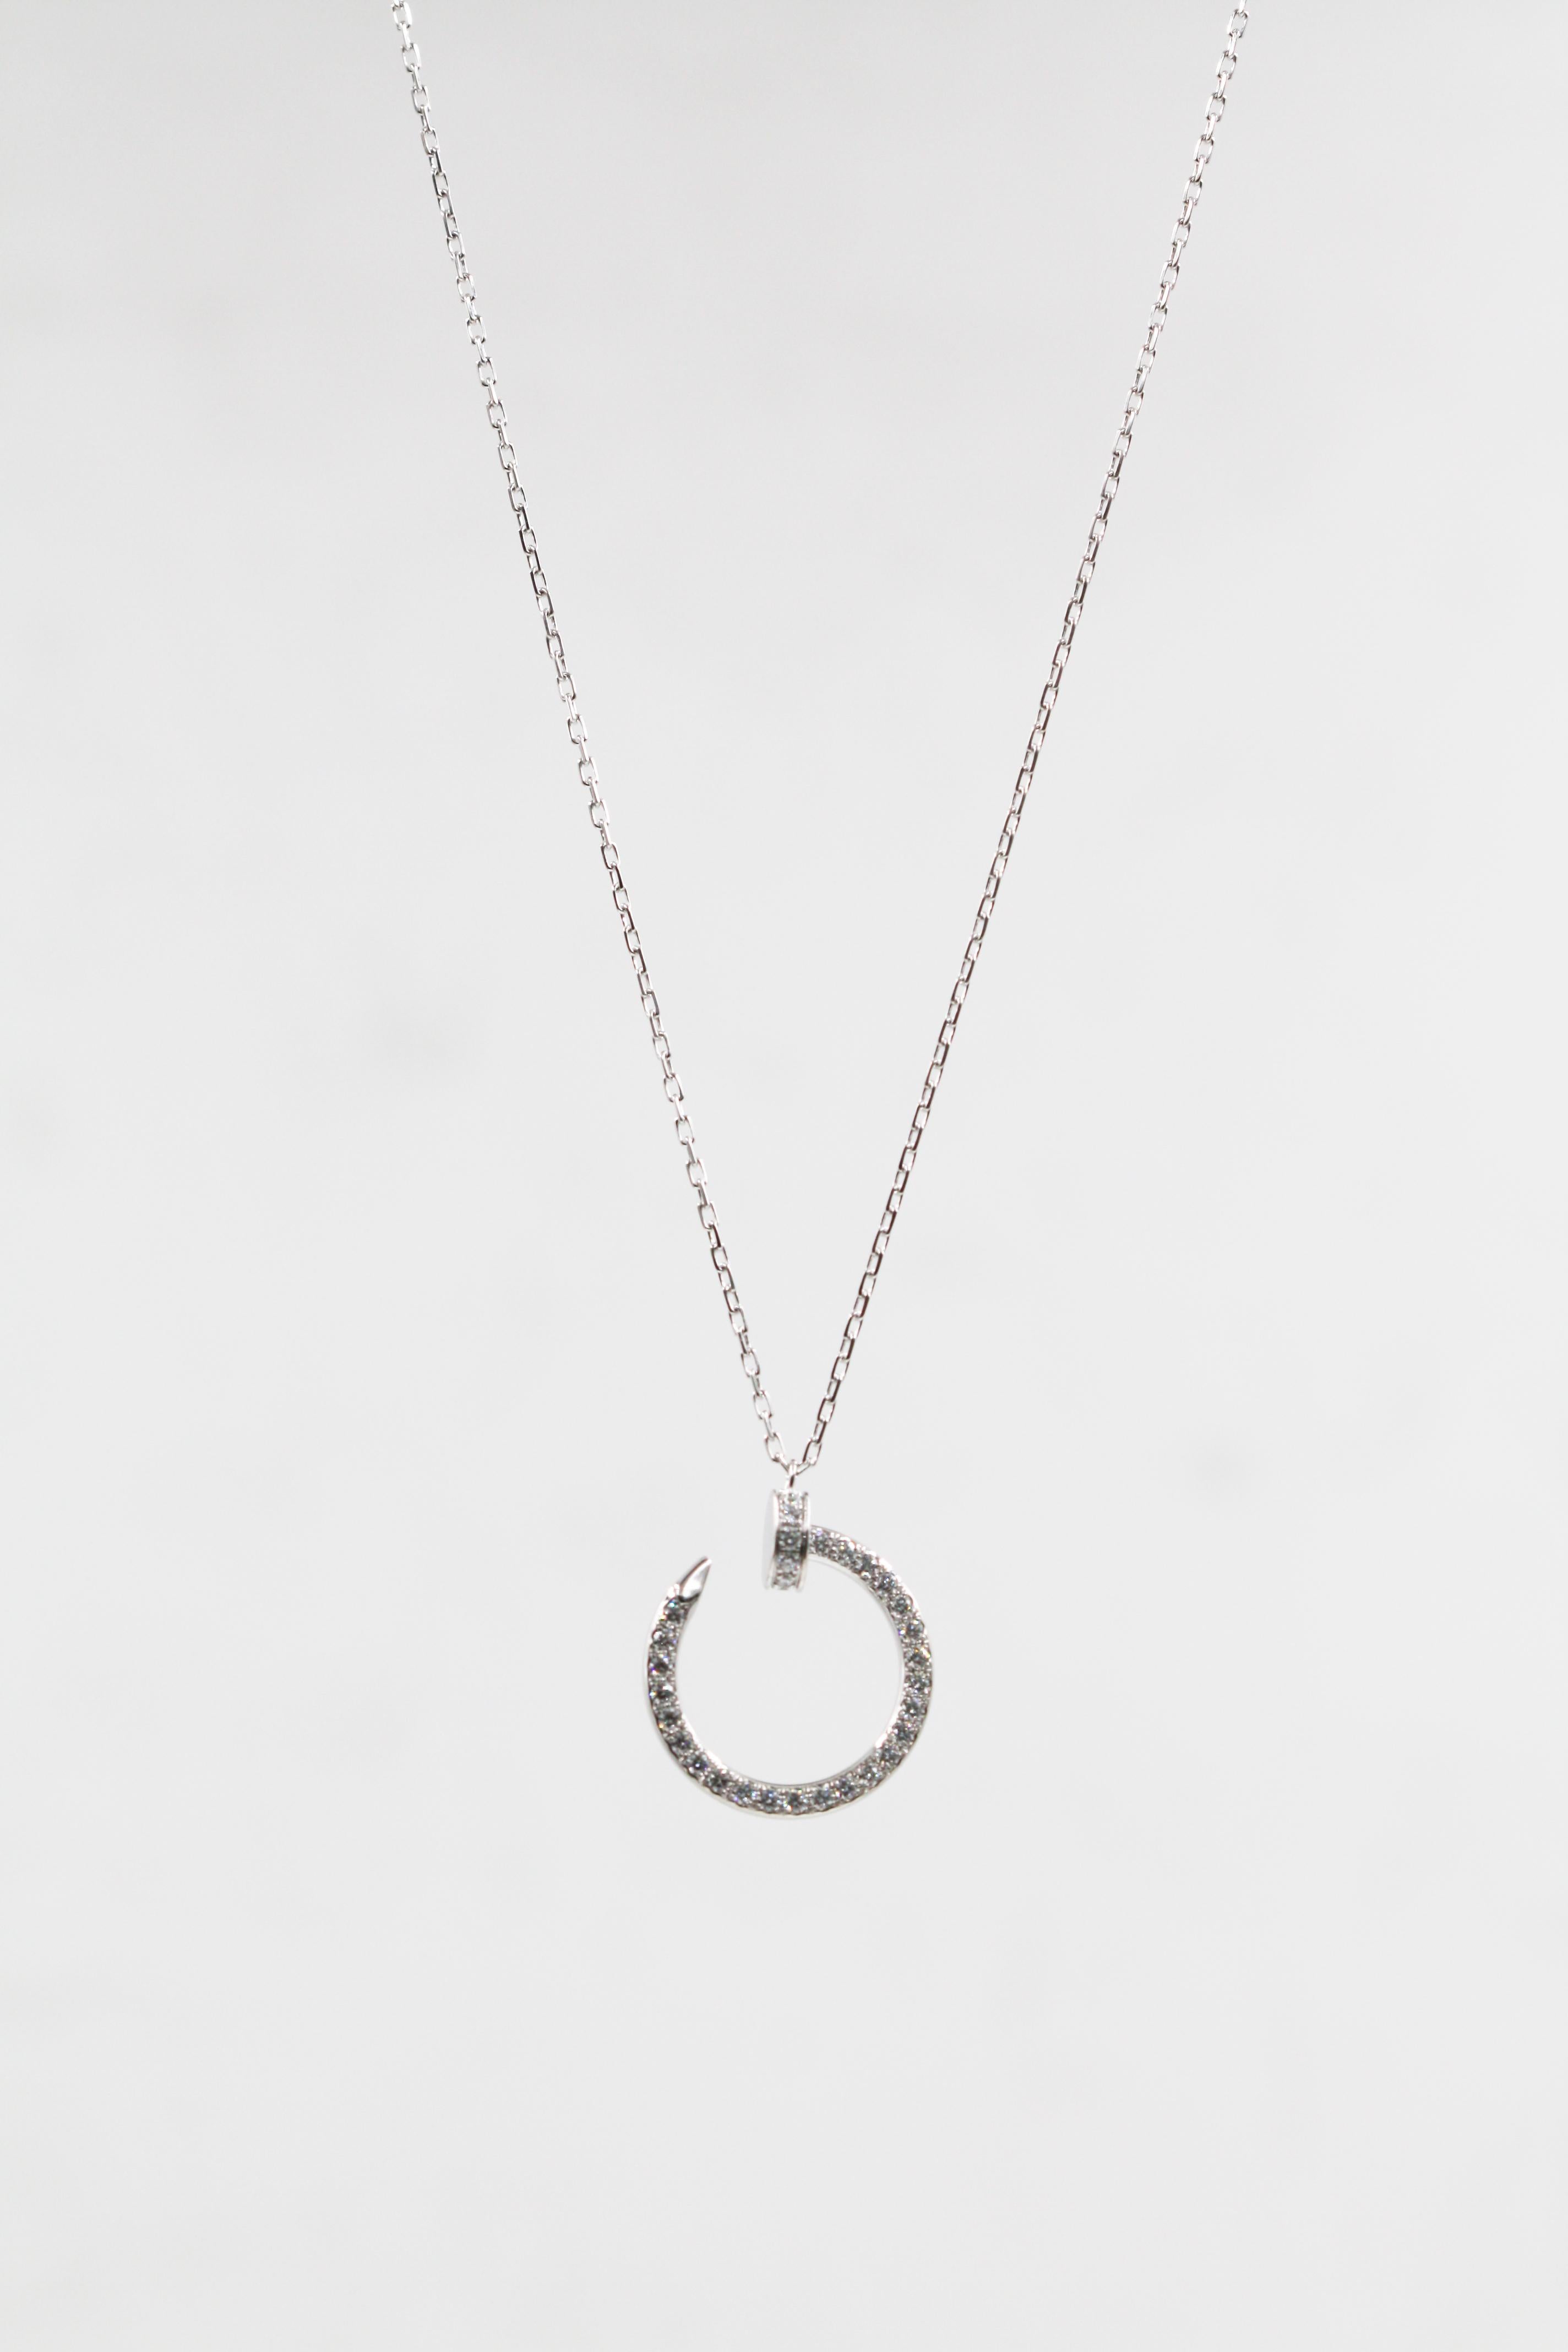 Cartier Juste un Clou Necklace, 18 Karat White Gold, Diamond Paved In Excellent Condition For Sale In New York, NY